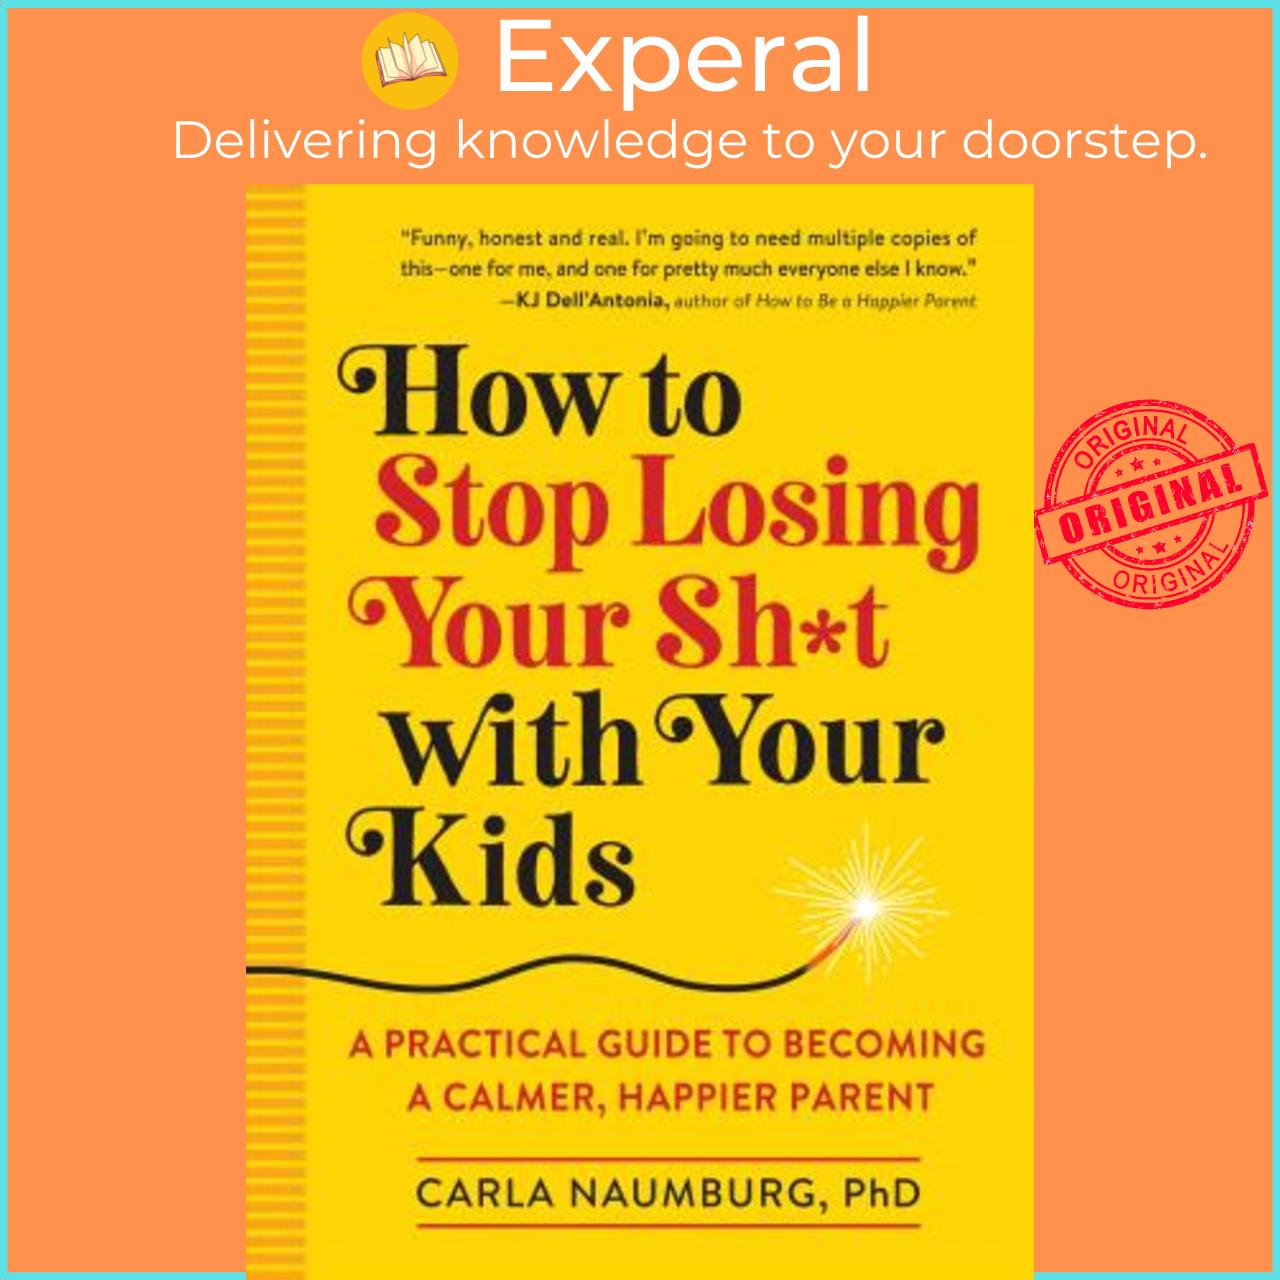 Hình ảnh Sách - How to Stop Losing Your Sh*t with Your Kids : A Practical Guide to Beco by Carla Naumburg (US edition, paperback)